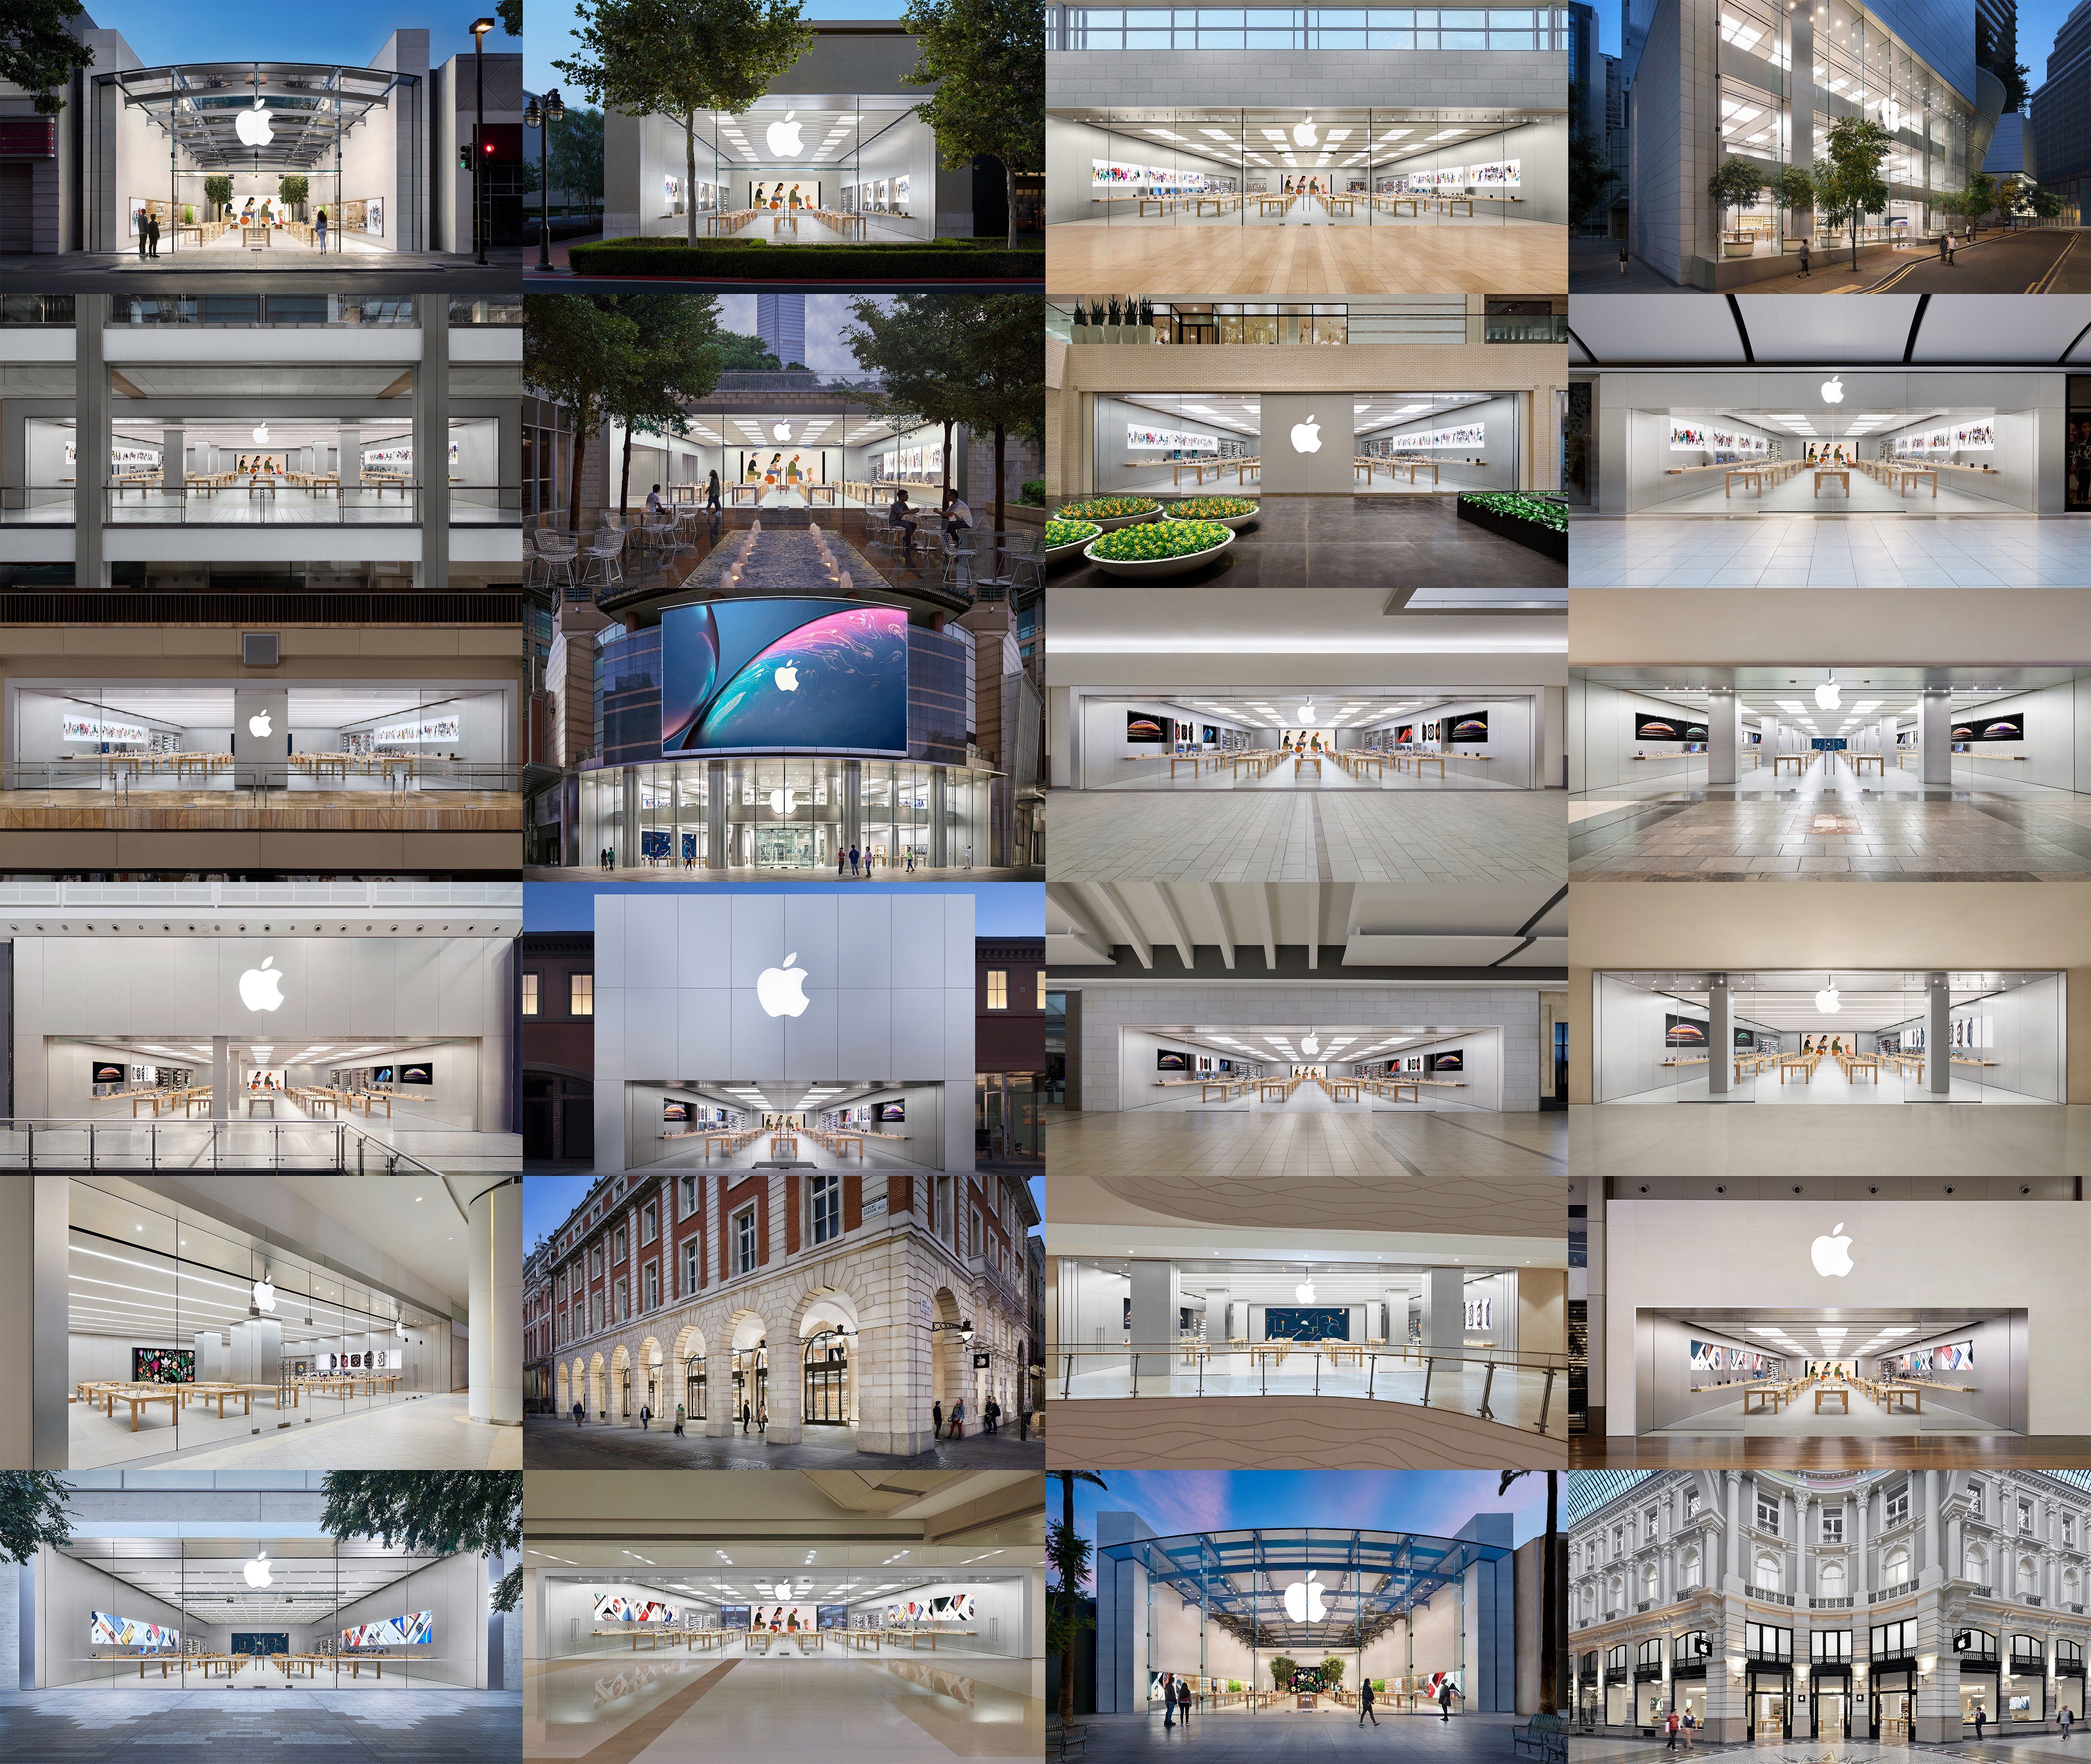 Apple's plans for remodeled store in Southlake, Texas shown in new